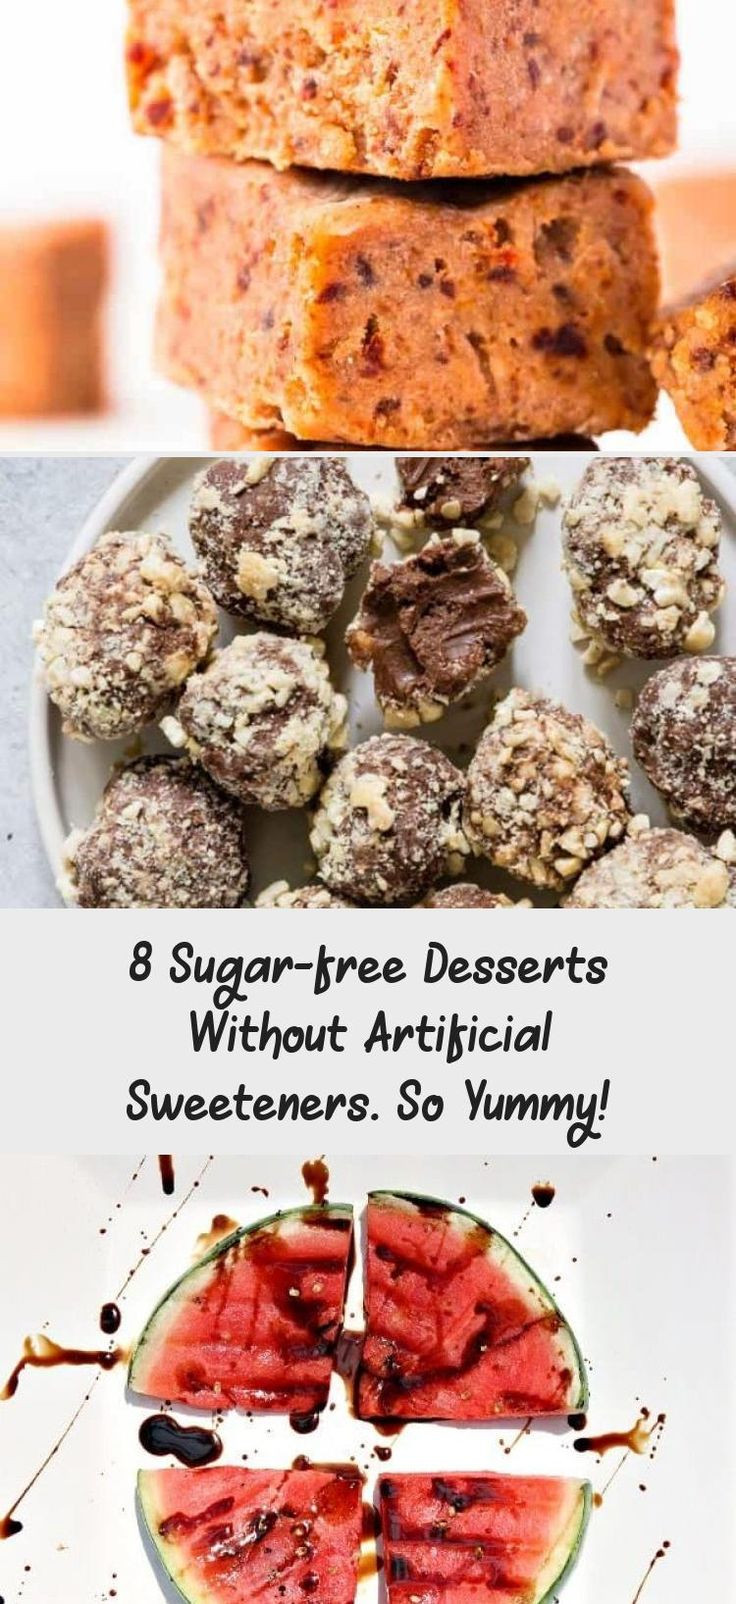 Sugar Free Desserts Without Artificial Sweeteners
 8 Sugar free Desserts Without Artificial Sweeteners So